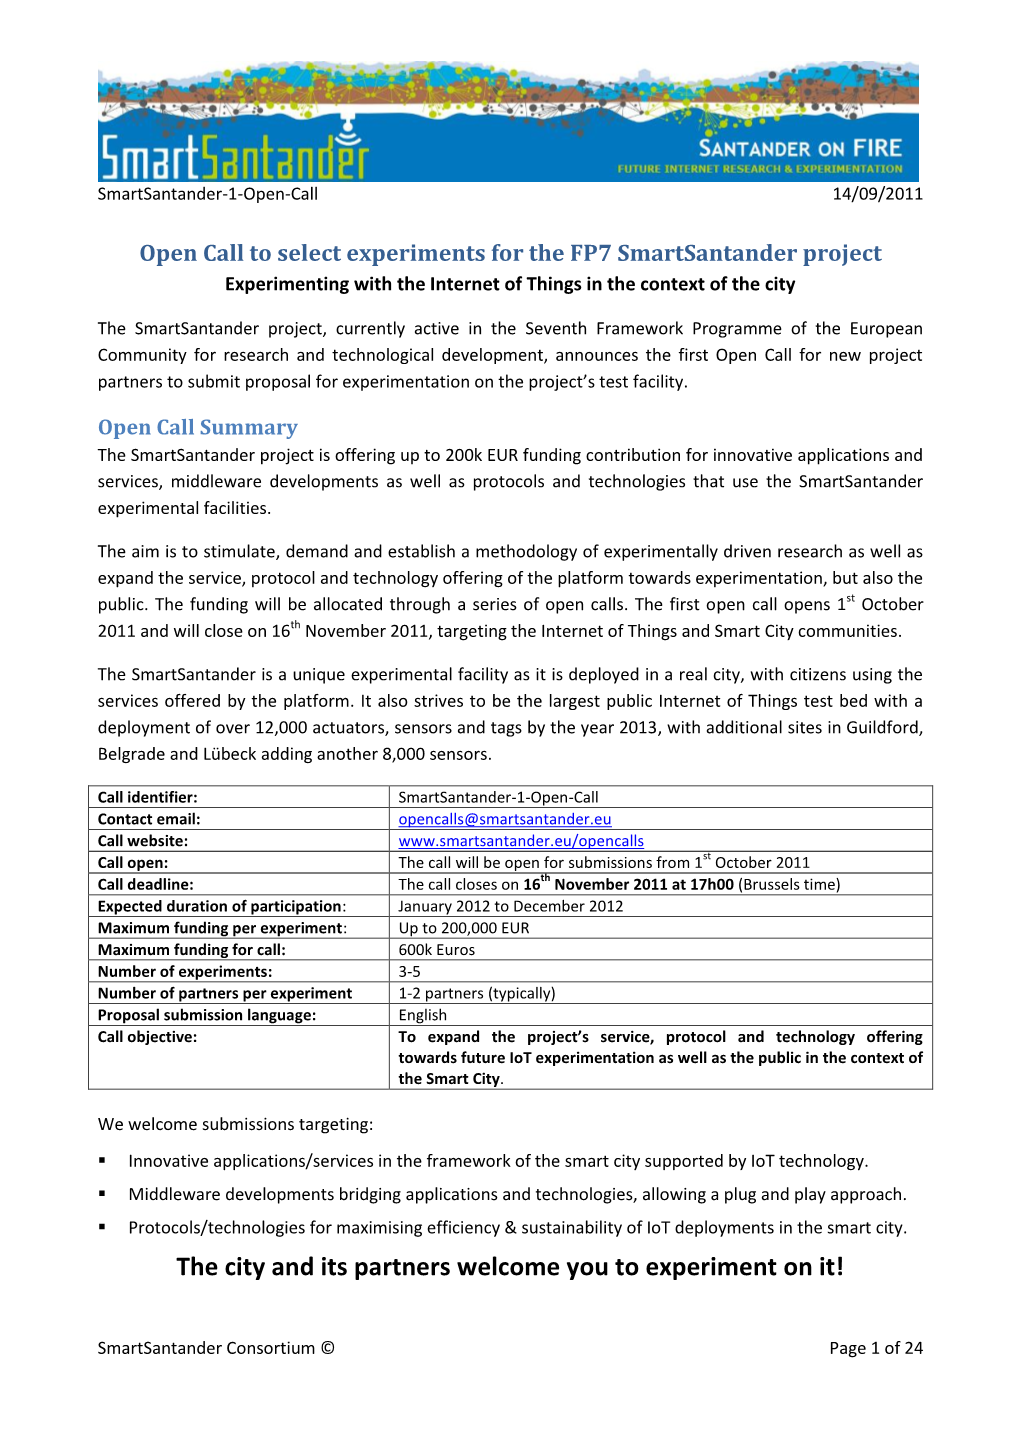 Open Call to Select Experiments for the FP7 Smartsantander Project Experimenting with the Internet of Things in the Context of the City